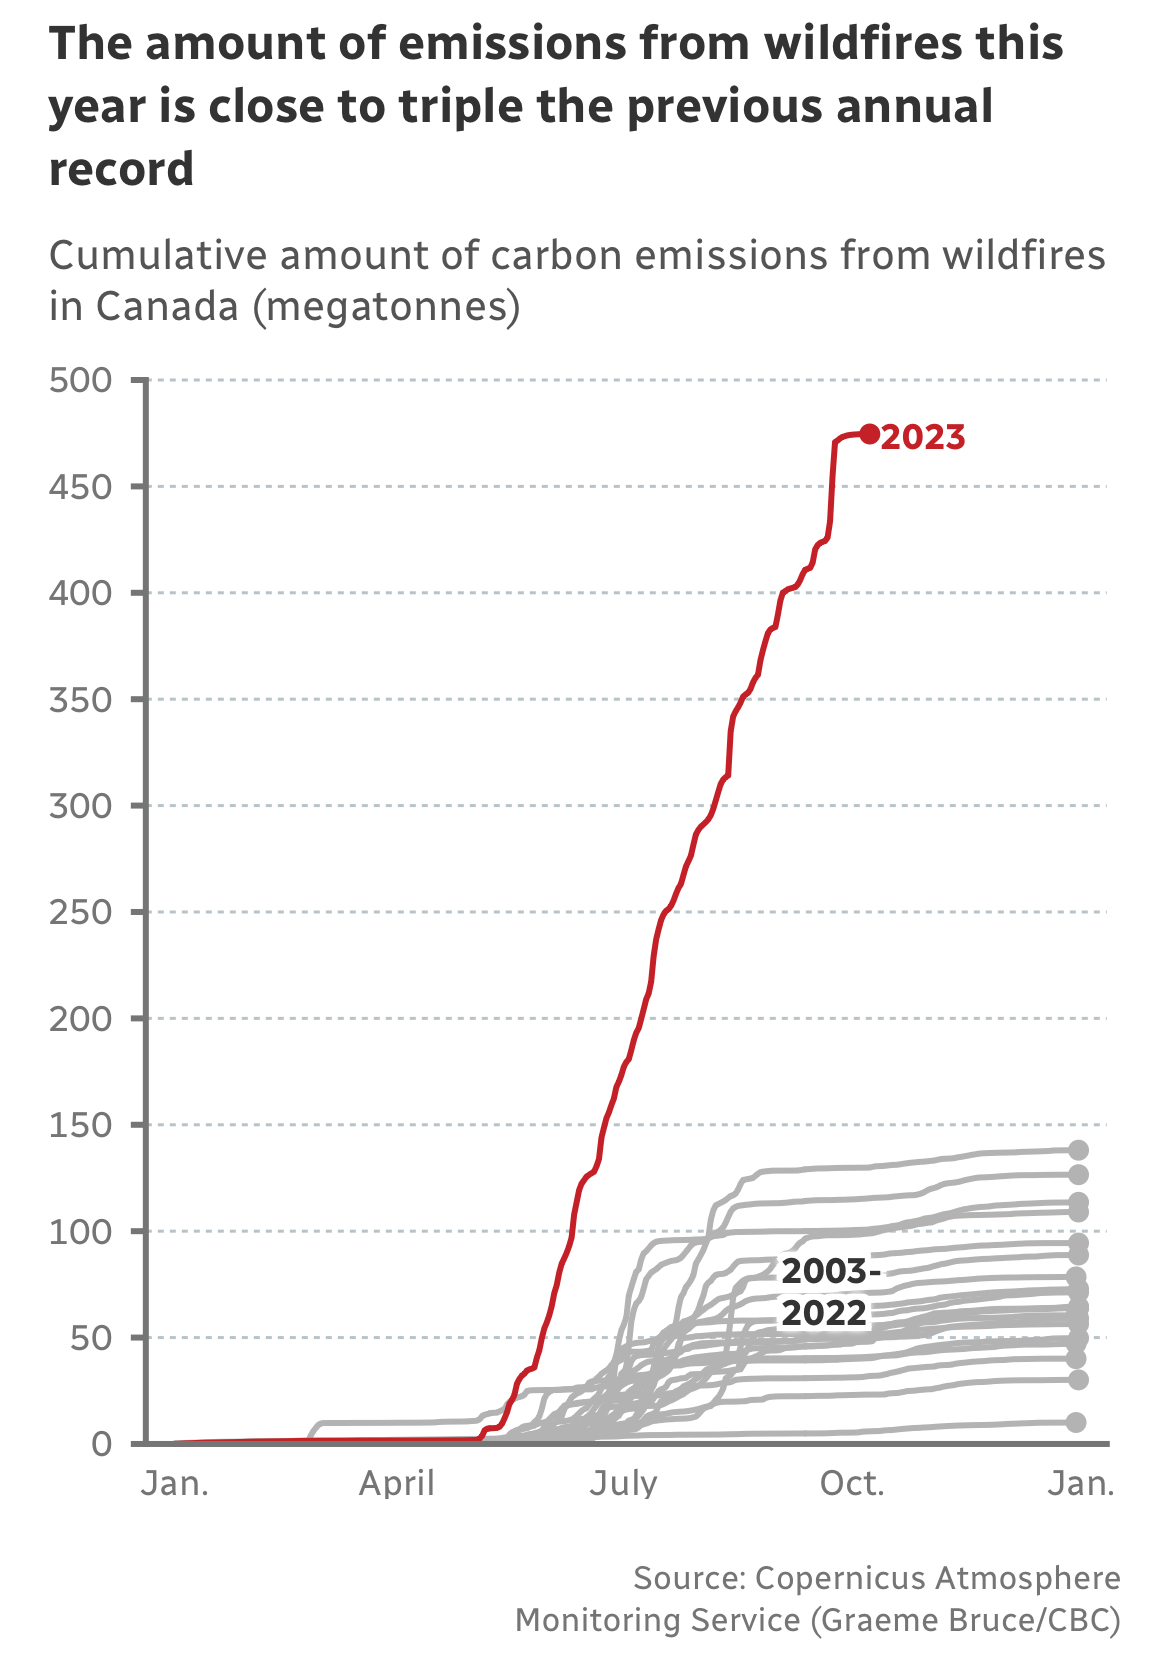 The amount of emissions from wildifres this year is close to triple the previous annual record. Source: Copernicus Atmosphere Monitoring Service (Graeme Bruce/CBC)